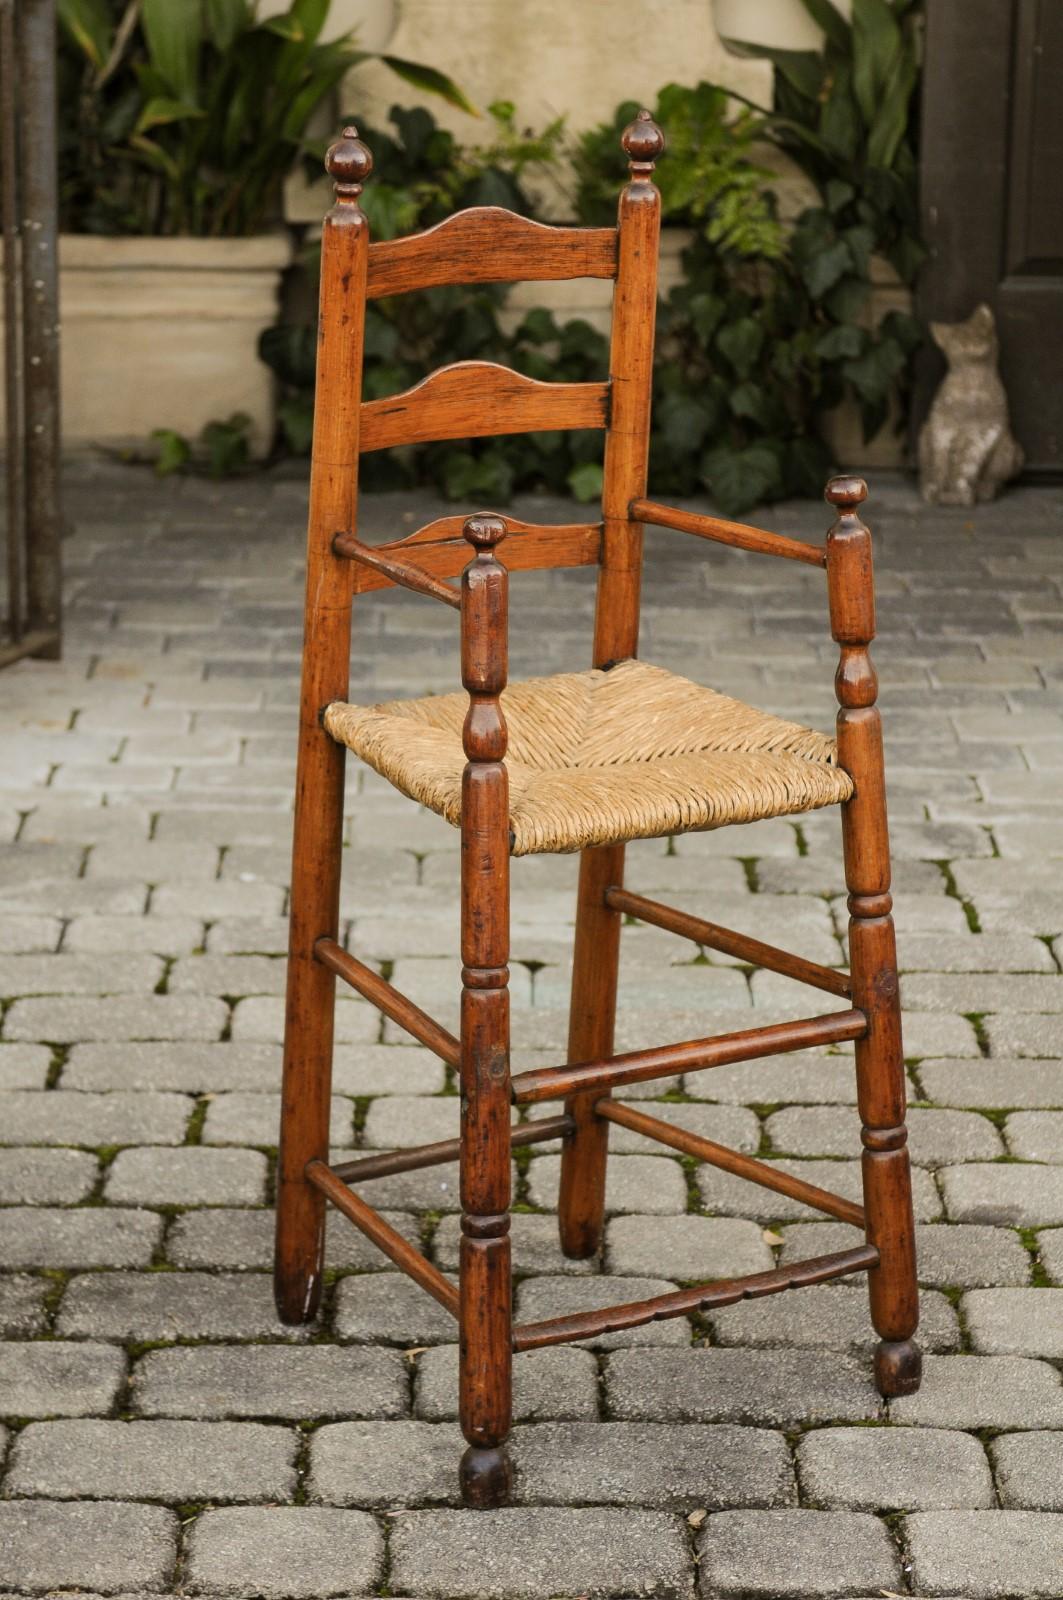 An American rustic pine child's high chair from the early 20th century with rush seat. Experience the warmth and nostalgia of early American craftsmanship with this rustic pine child's high chair from the early 20th century, complete with a